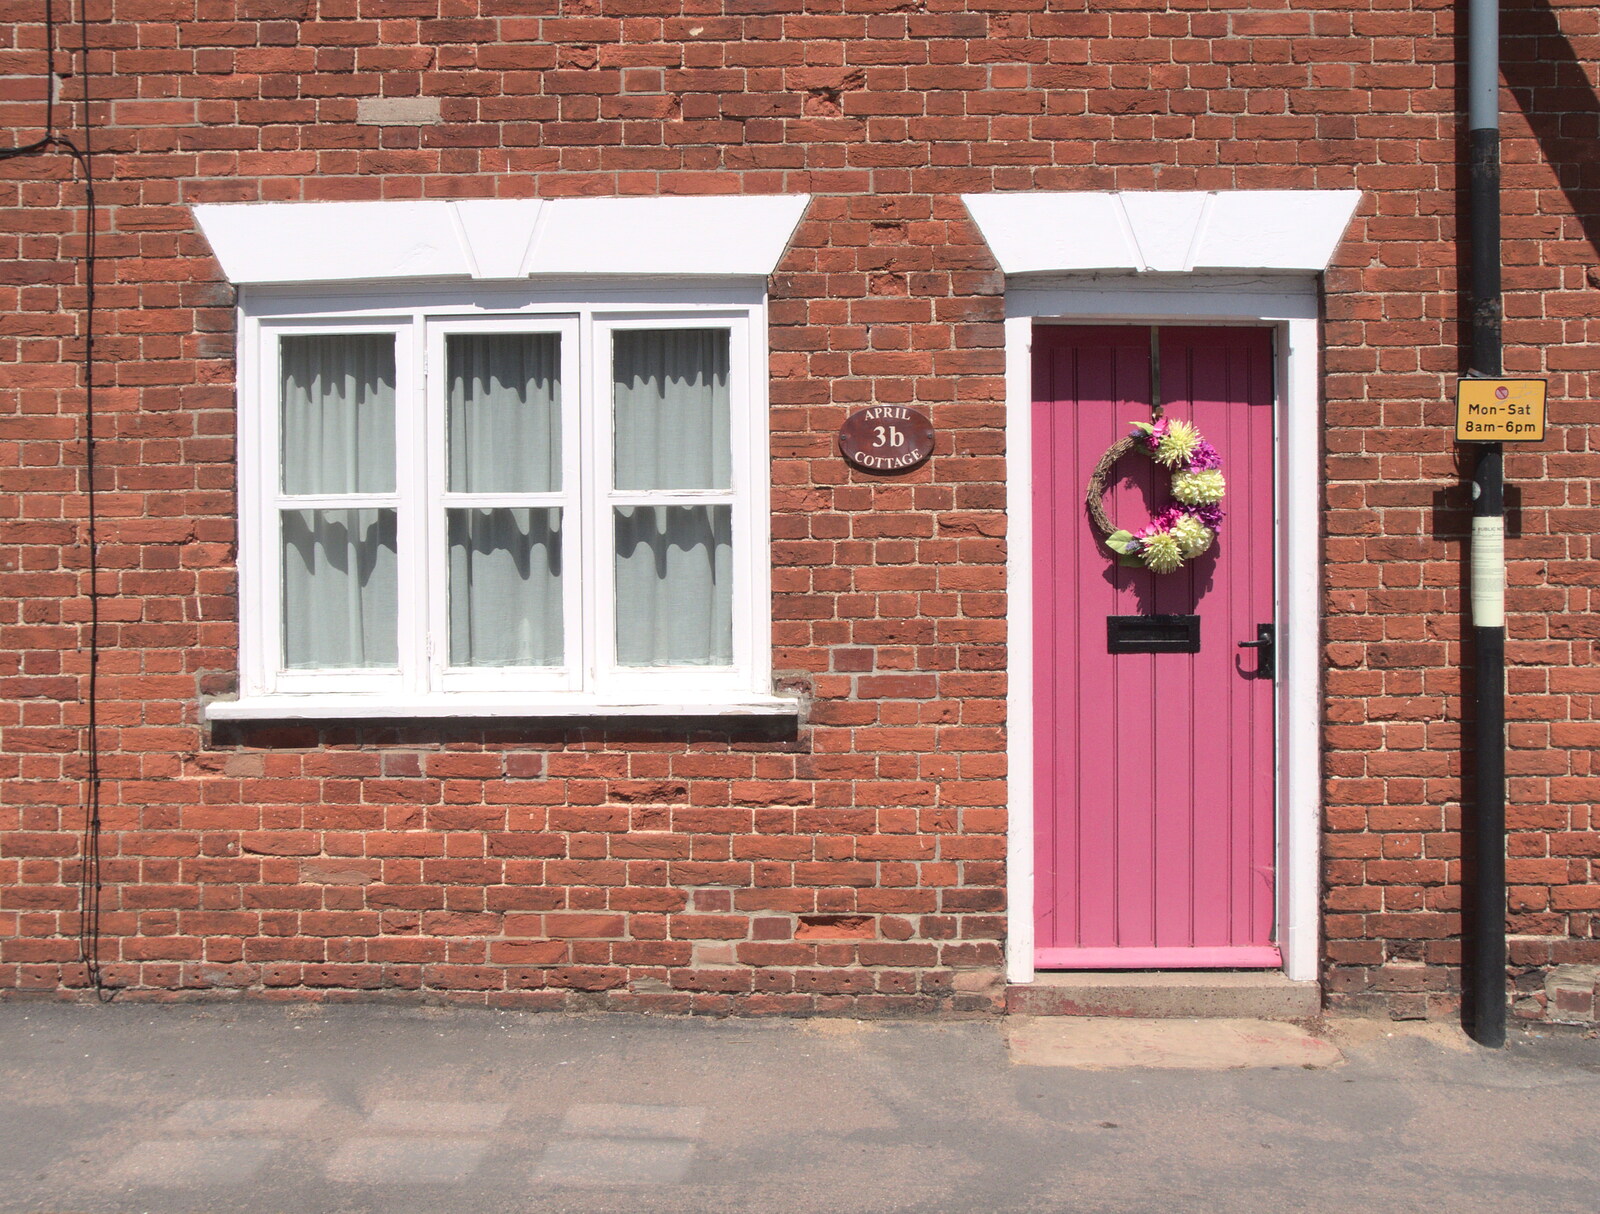 A nice wreath on a door from Pizza at the Village Hall, Brome, Suffolk - 24th June 2022